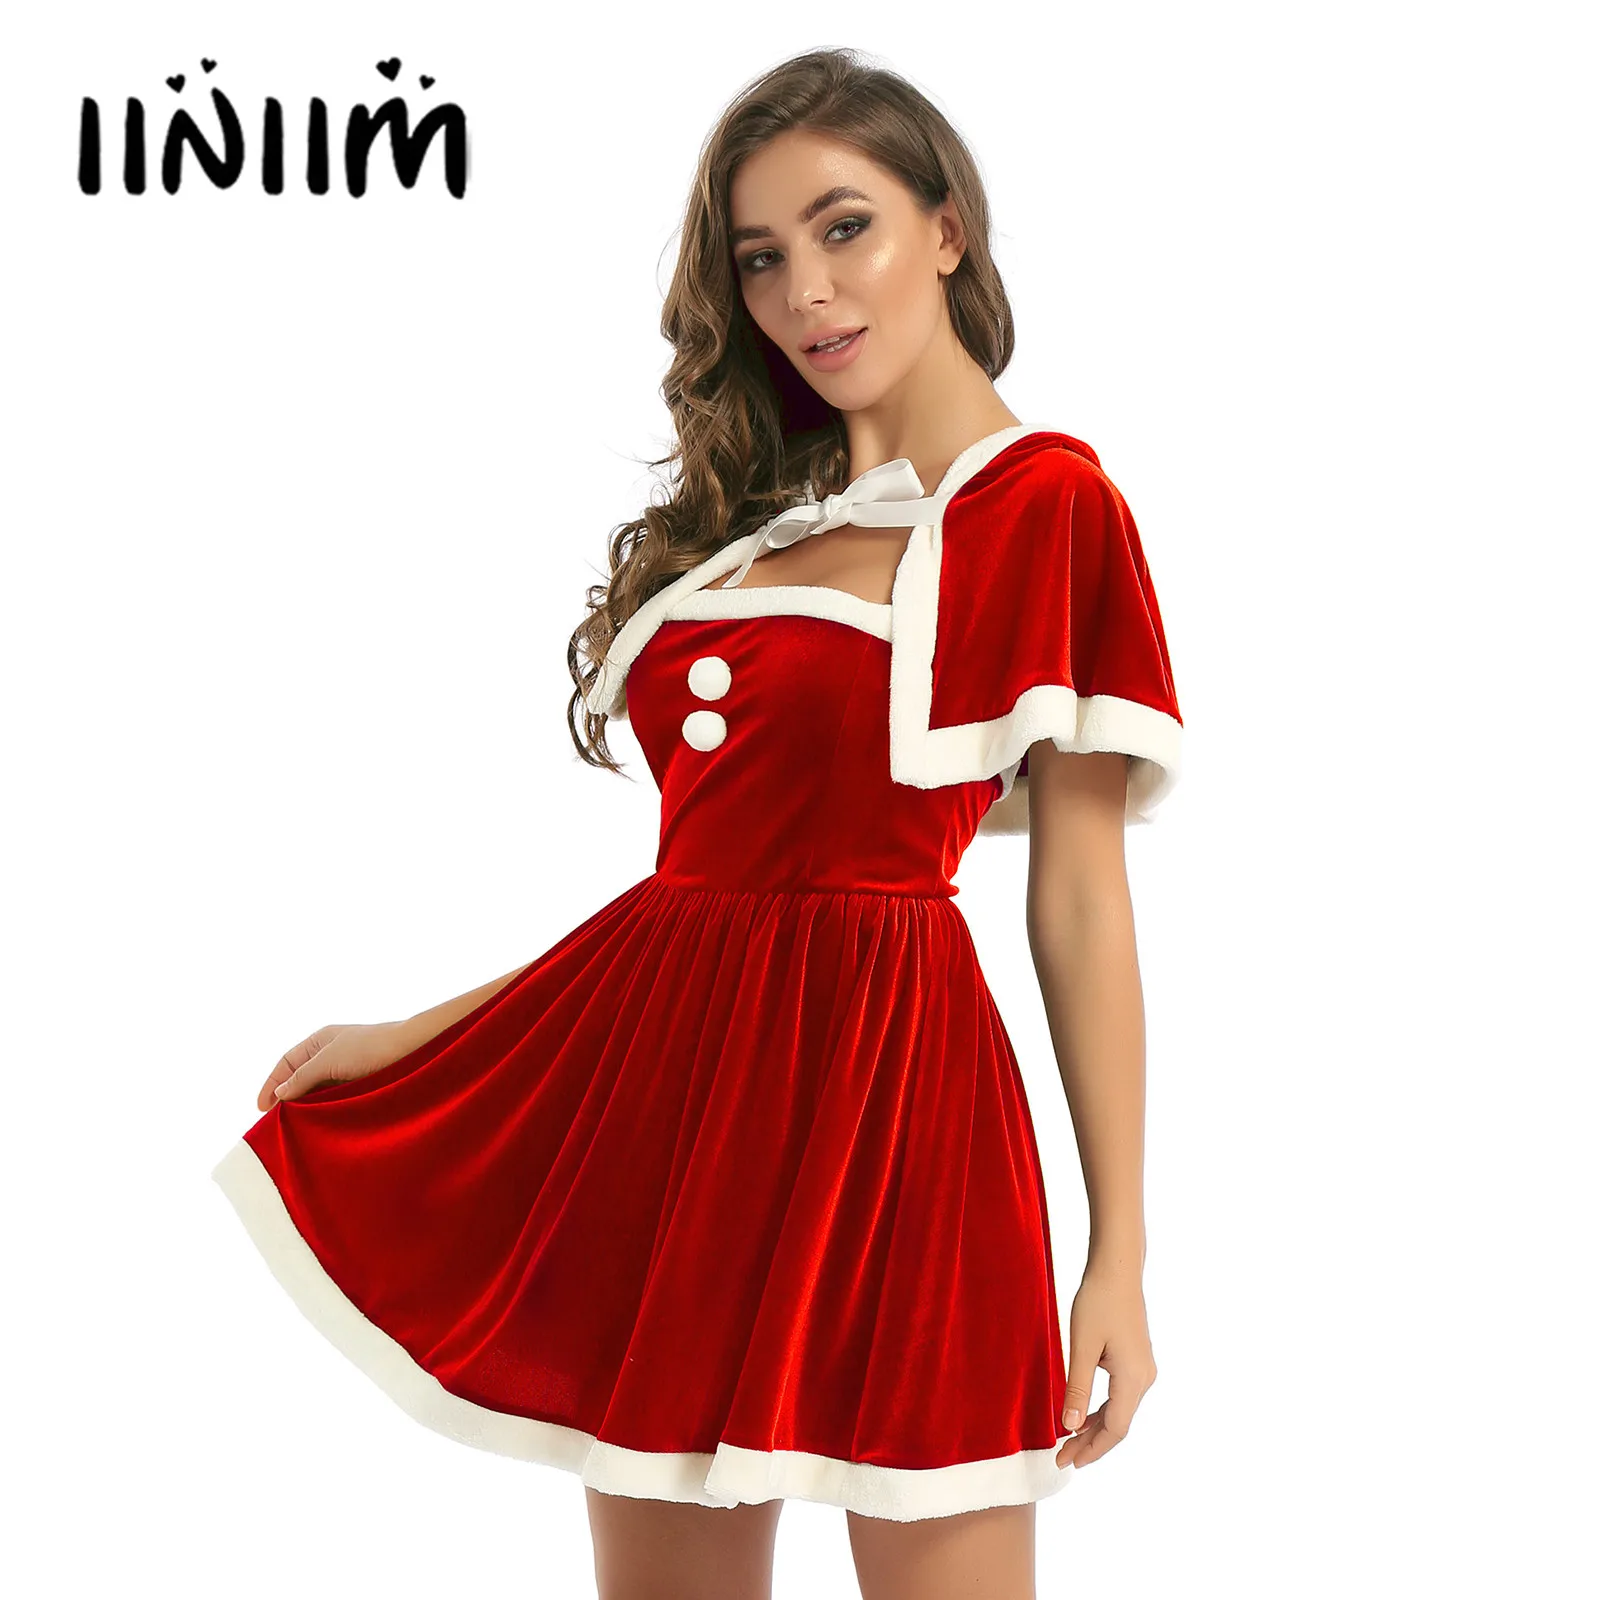 

Womens Winter Christmas Clothes Reindeer Xmas Santa Costume Outfits Winter Holiday Party Femme Dress Up Top Dress Hooded Cape